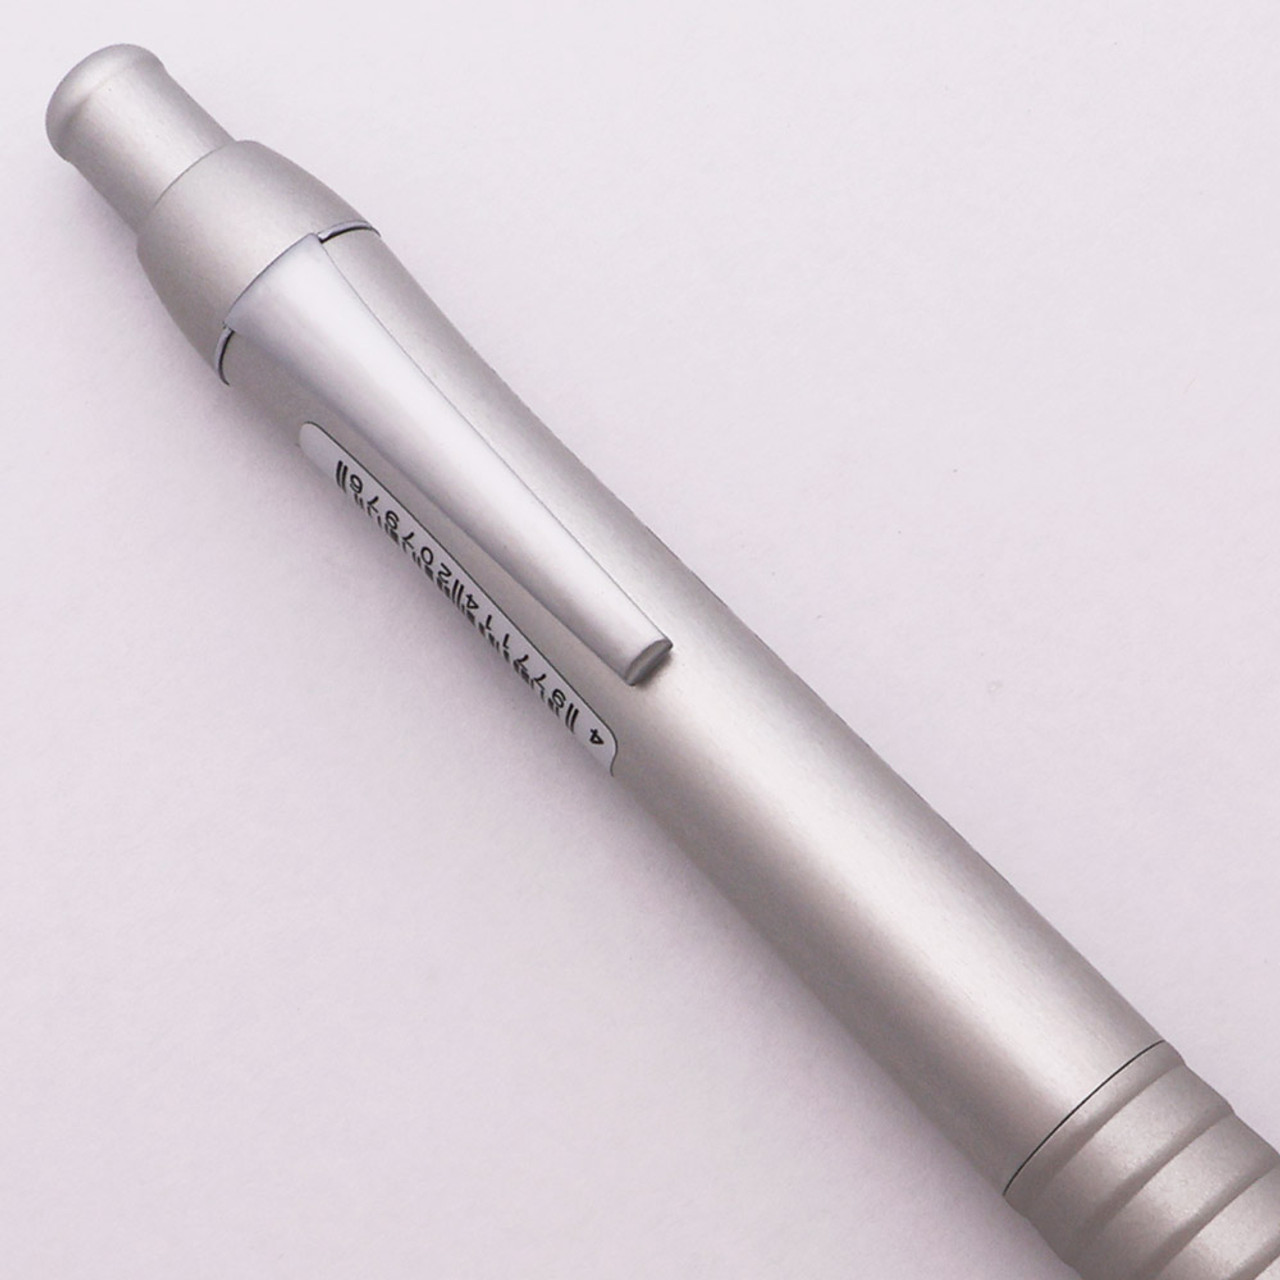 Platinum Pro-Use 1500 Mechanical Pencil - Brushed Aluminum, 0.3 mm Leads (Near Mint, Works Well)